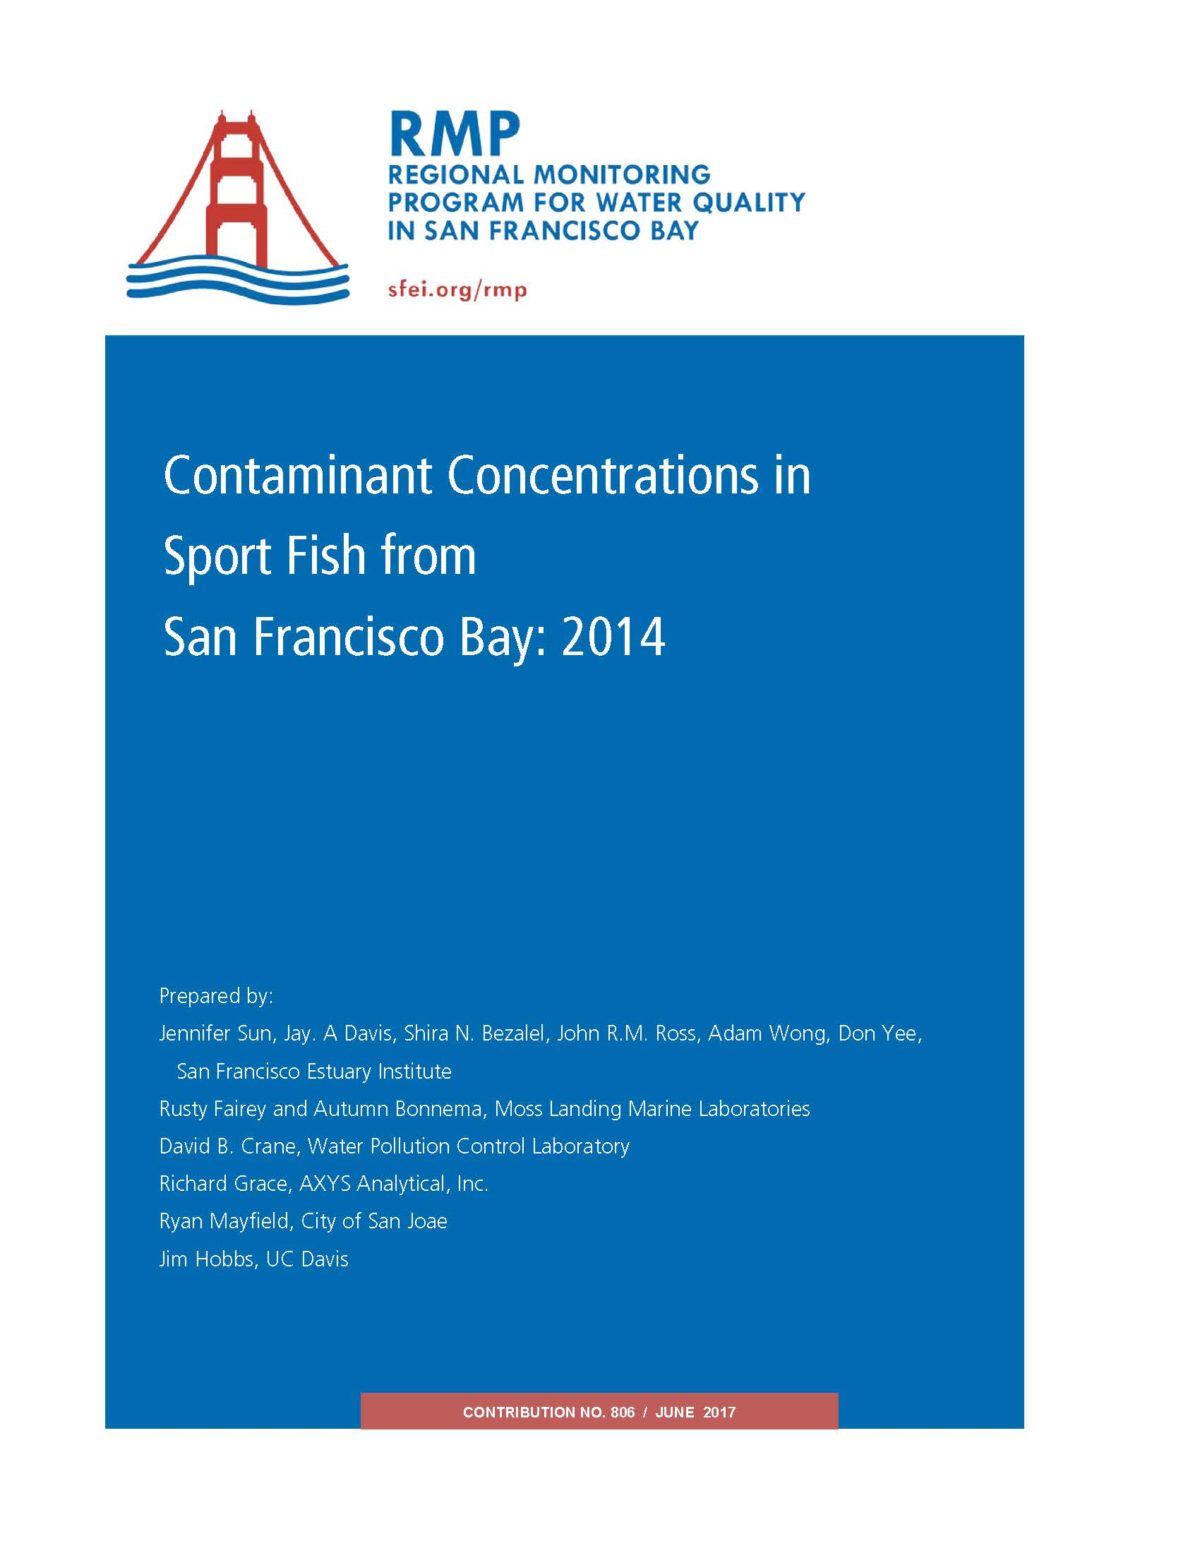 Contaminant Concentrations in Sport Fish from San Francisco Bay: 2014